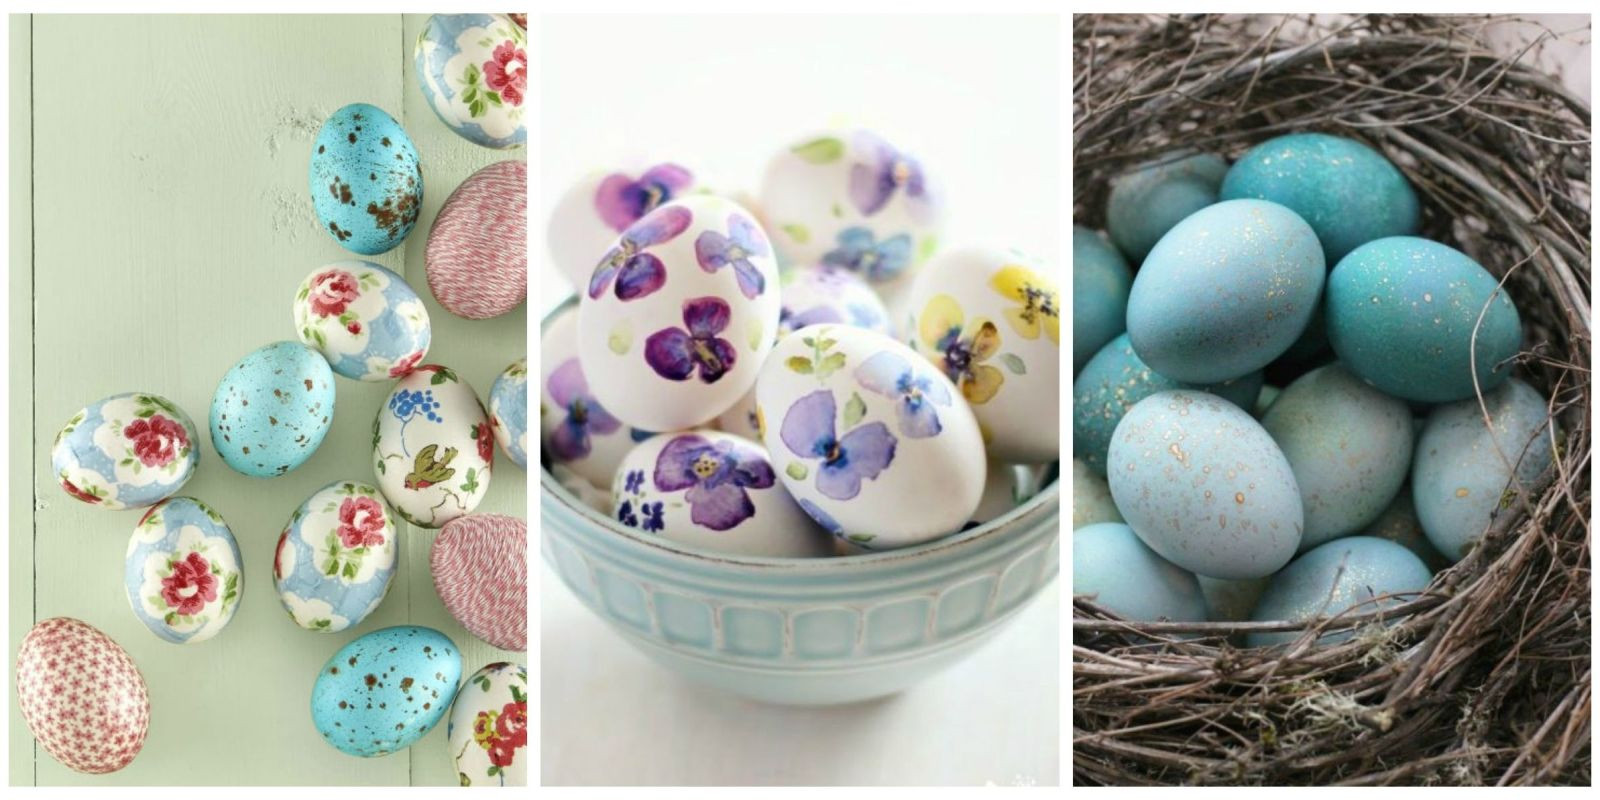 Easter Egg Decoration Ideas
 60 Fun Easter Egg Designs Creative Ideas for Decorating